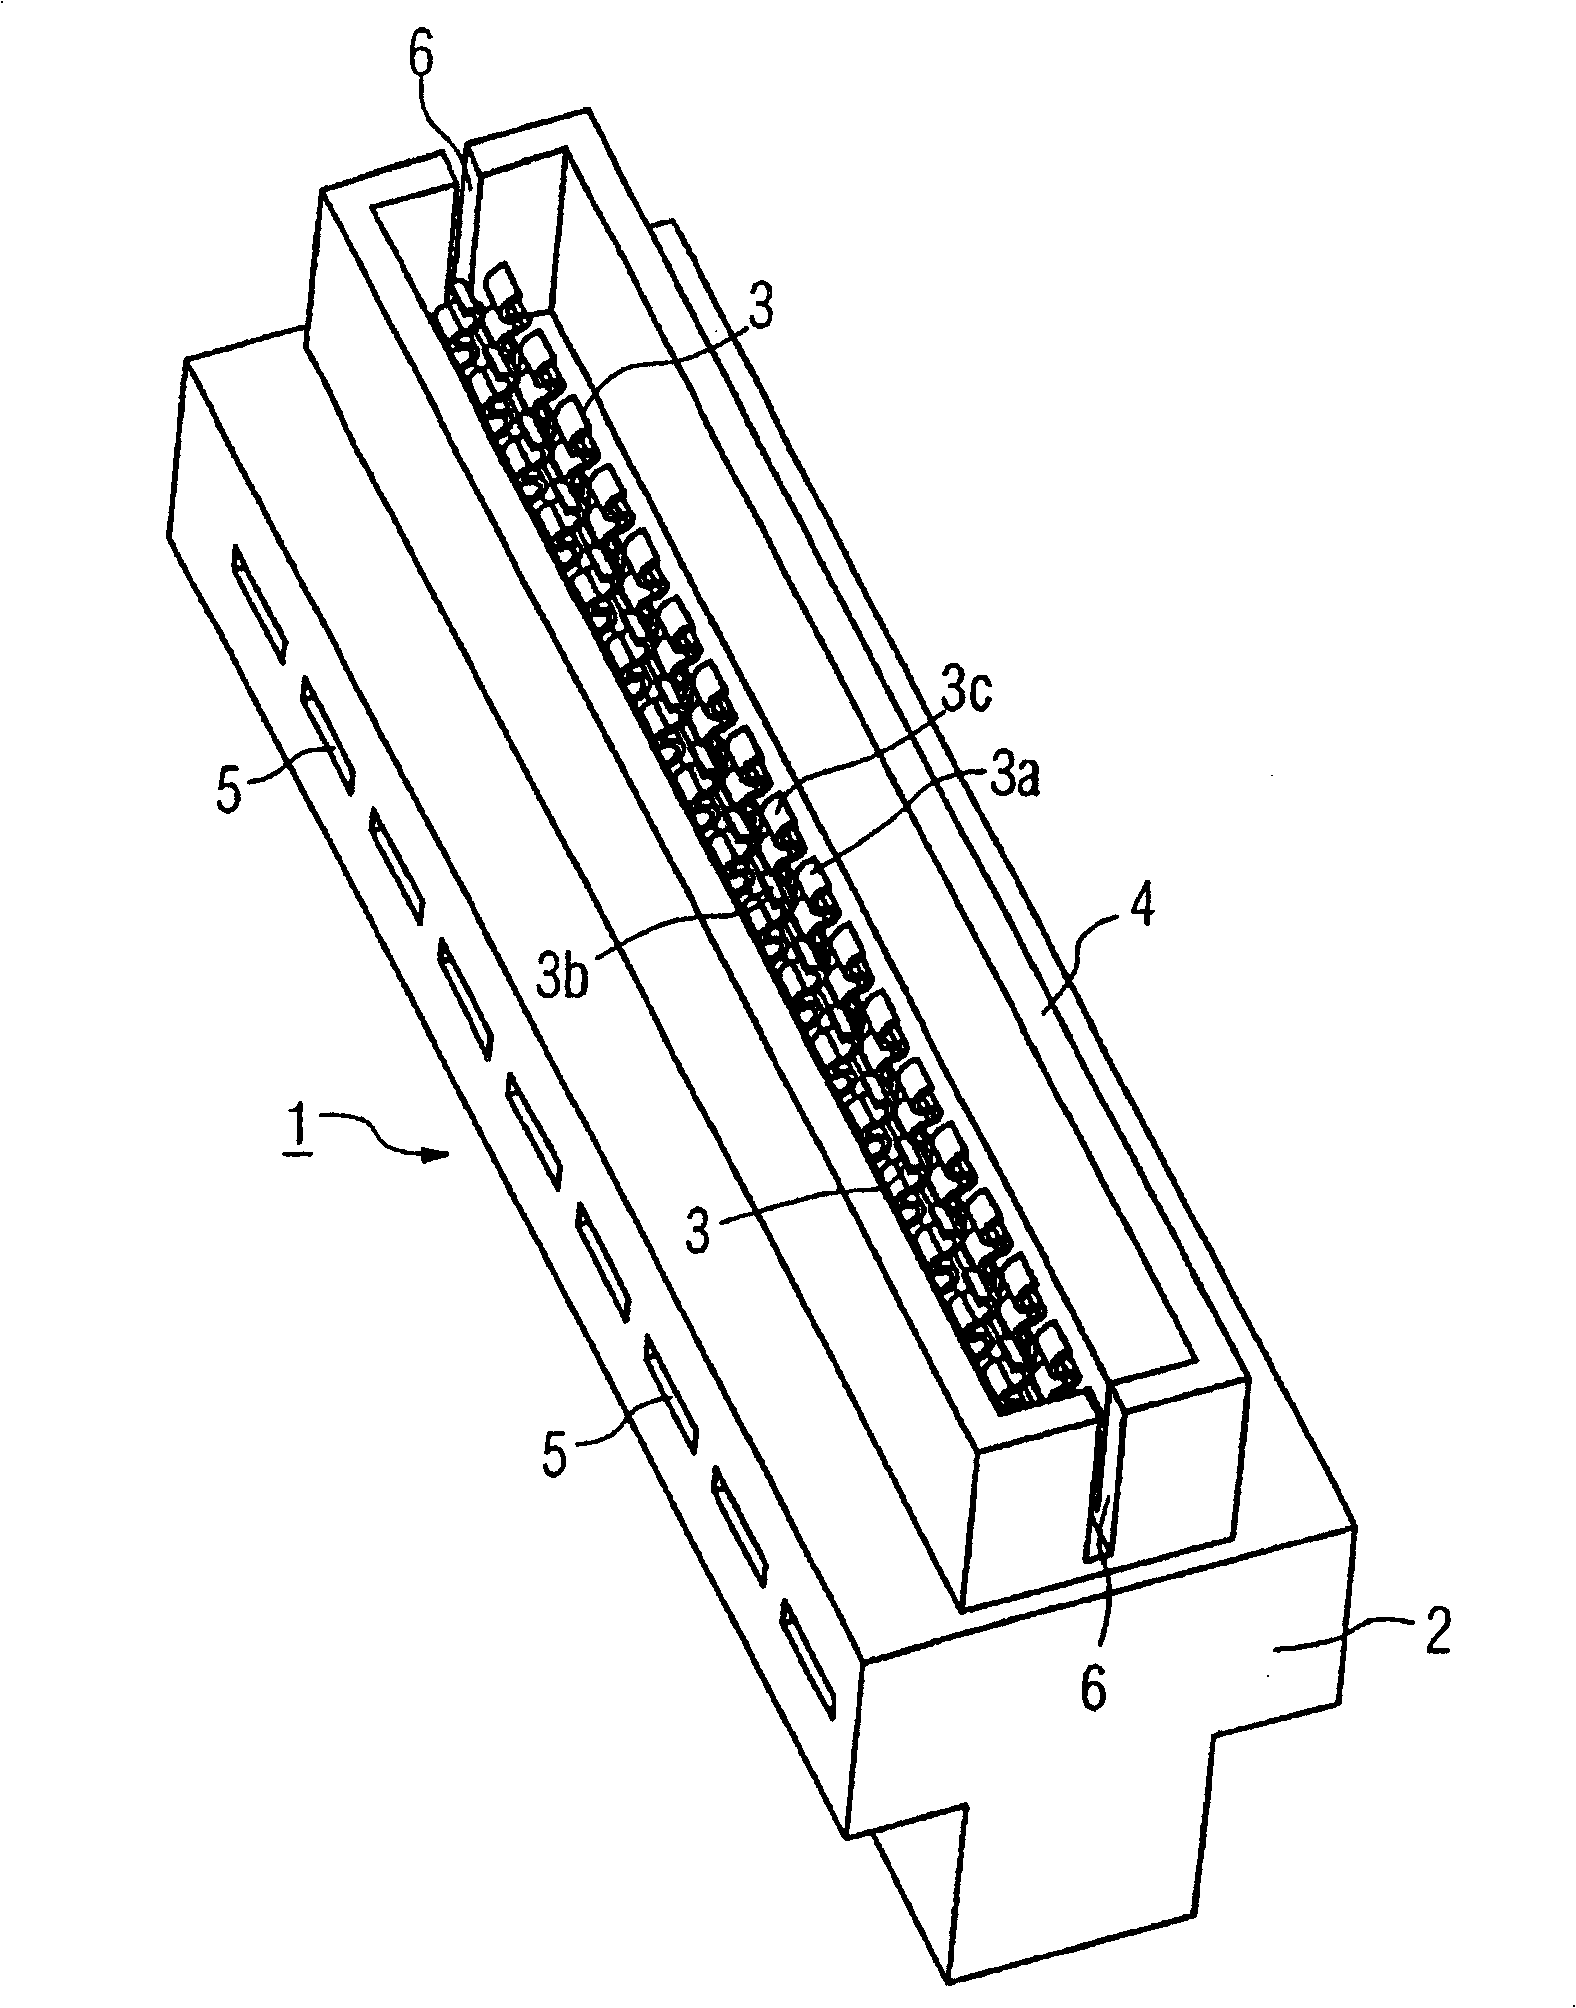 Multipoint plug for electrically connecting metal strip conductors arranged on both sides of a circuit board